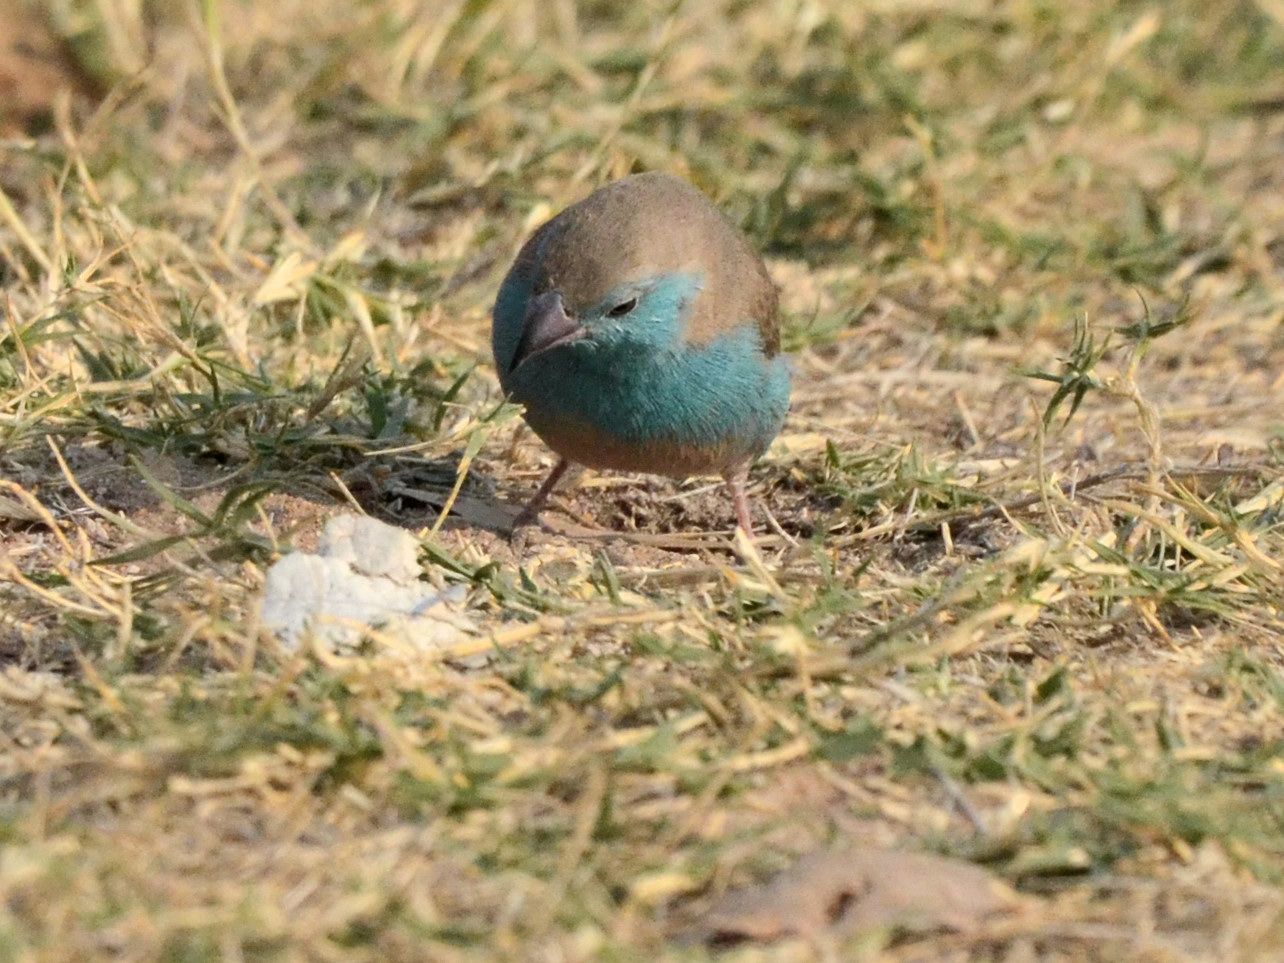 Click picture to see more Blue Waxbills.